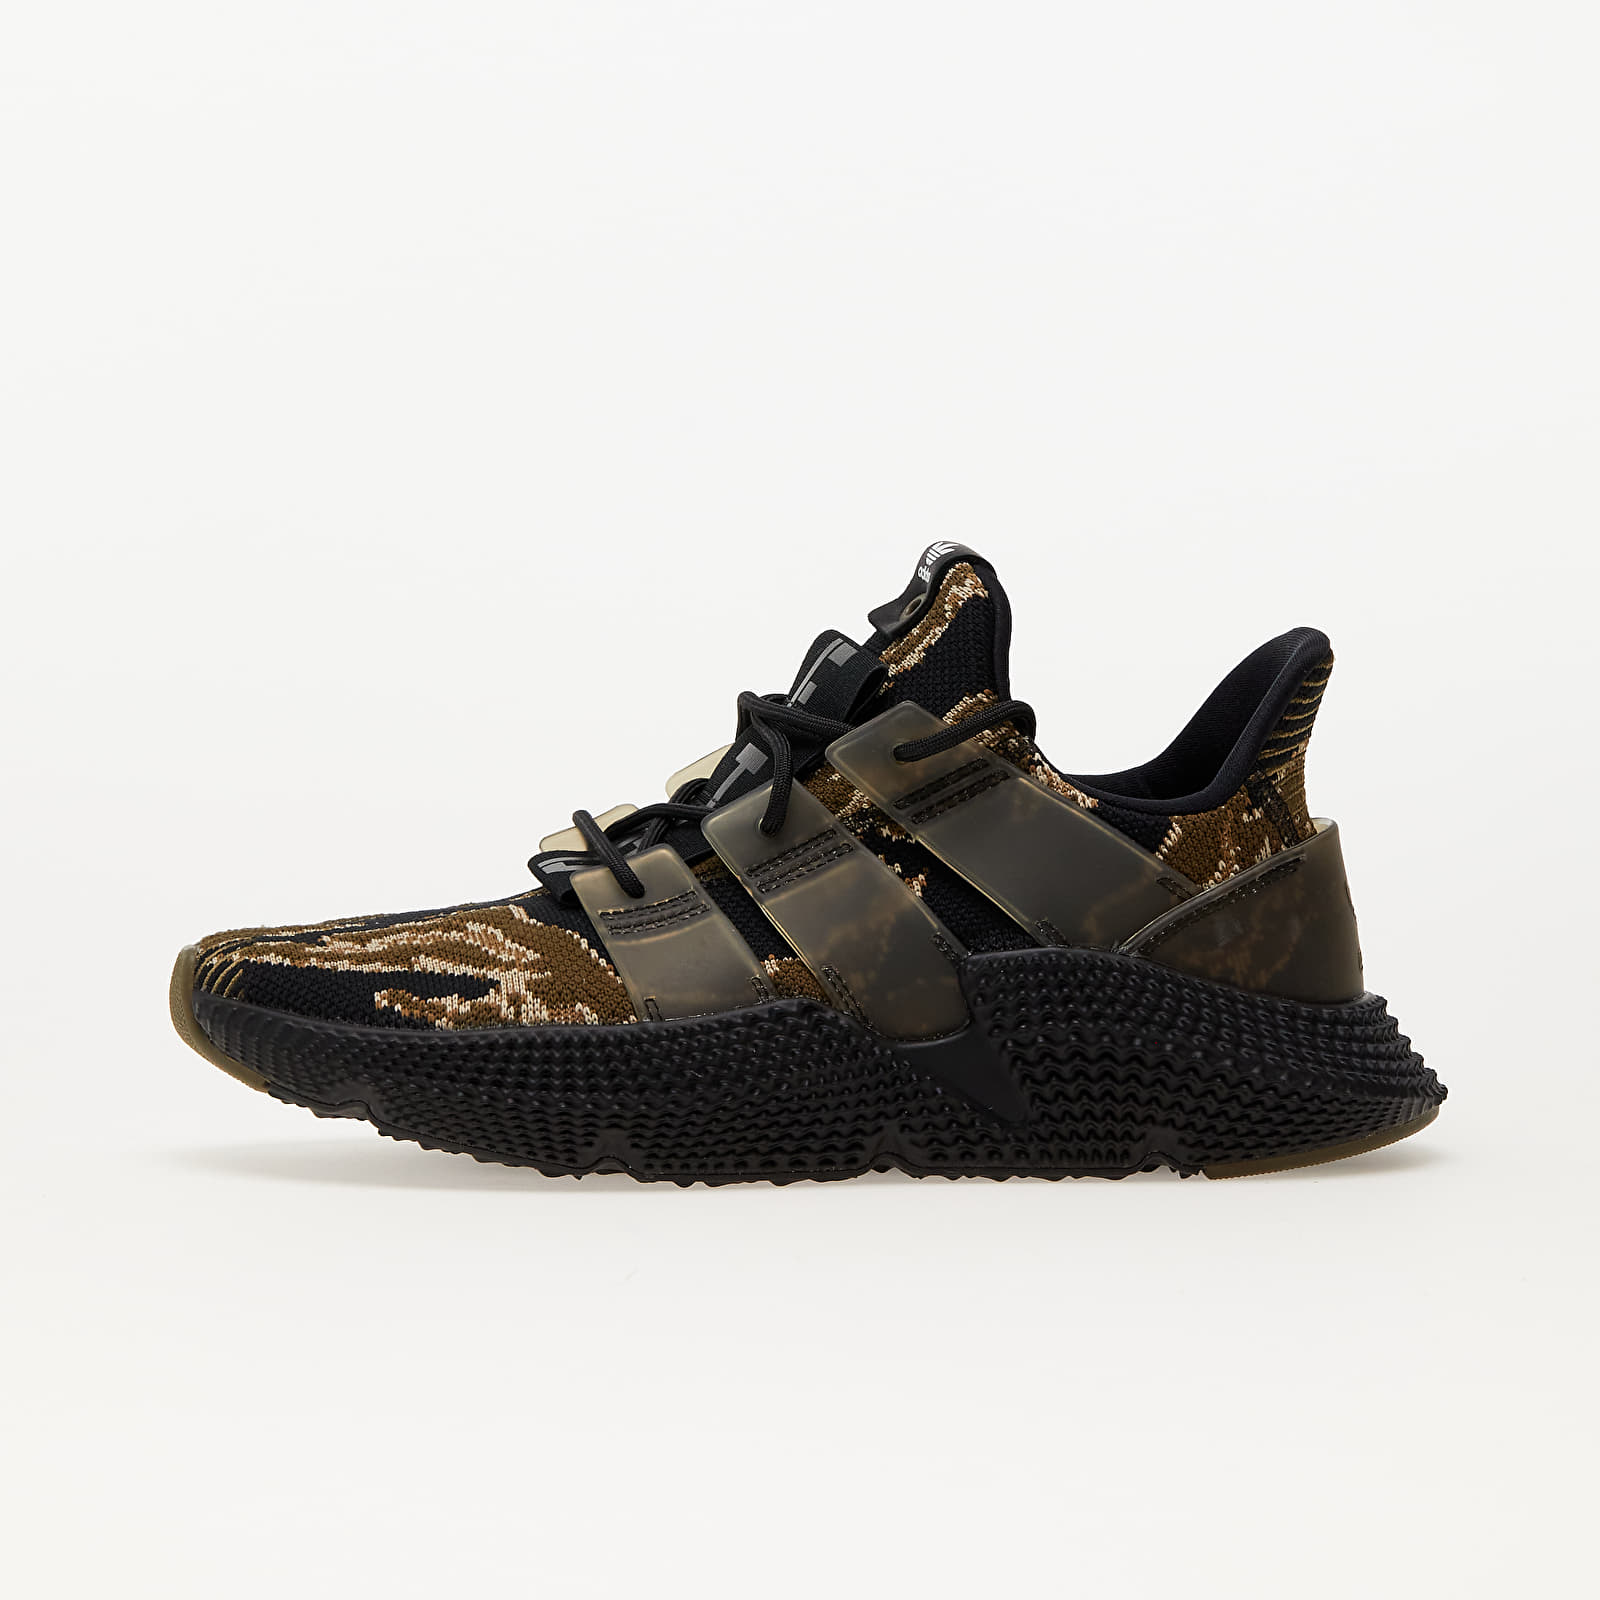 Men's shoes adidas Consortium x Undefeated Prophere Core Black/ Trace Olive/ Raw Gold